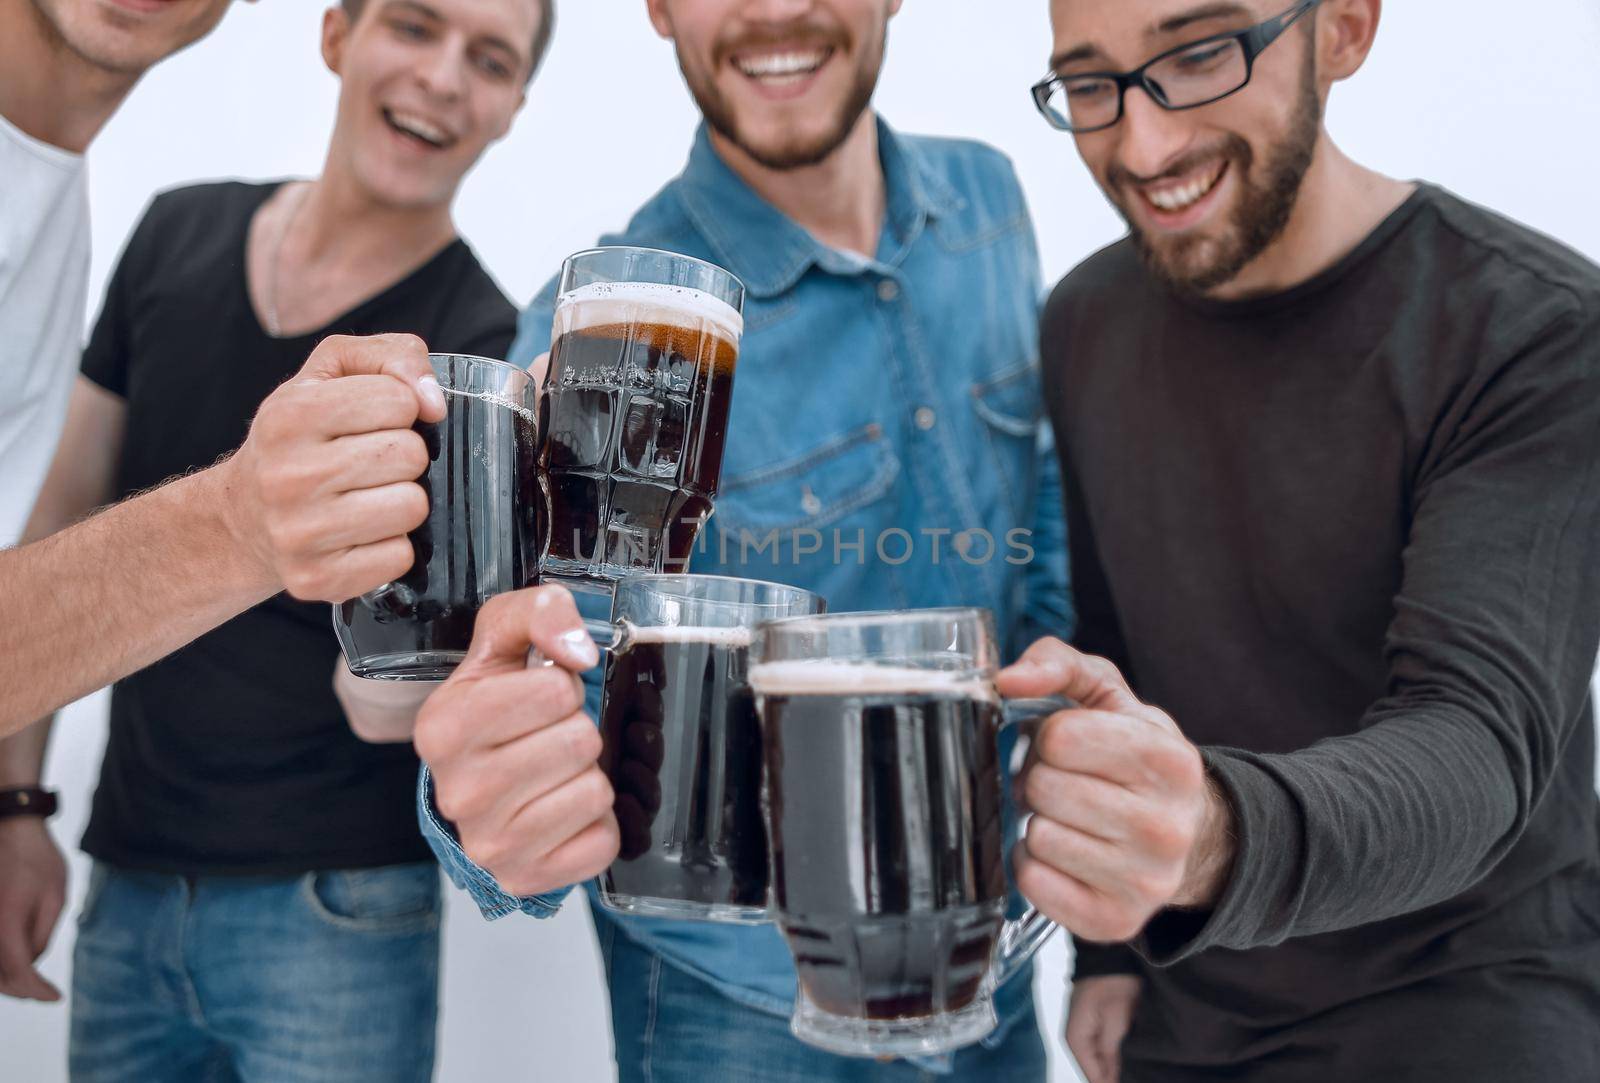 Joyful people holding big beer mug full of beer and looking at camera, isolated on white background